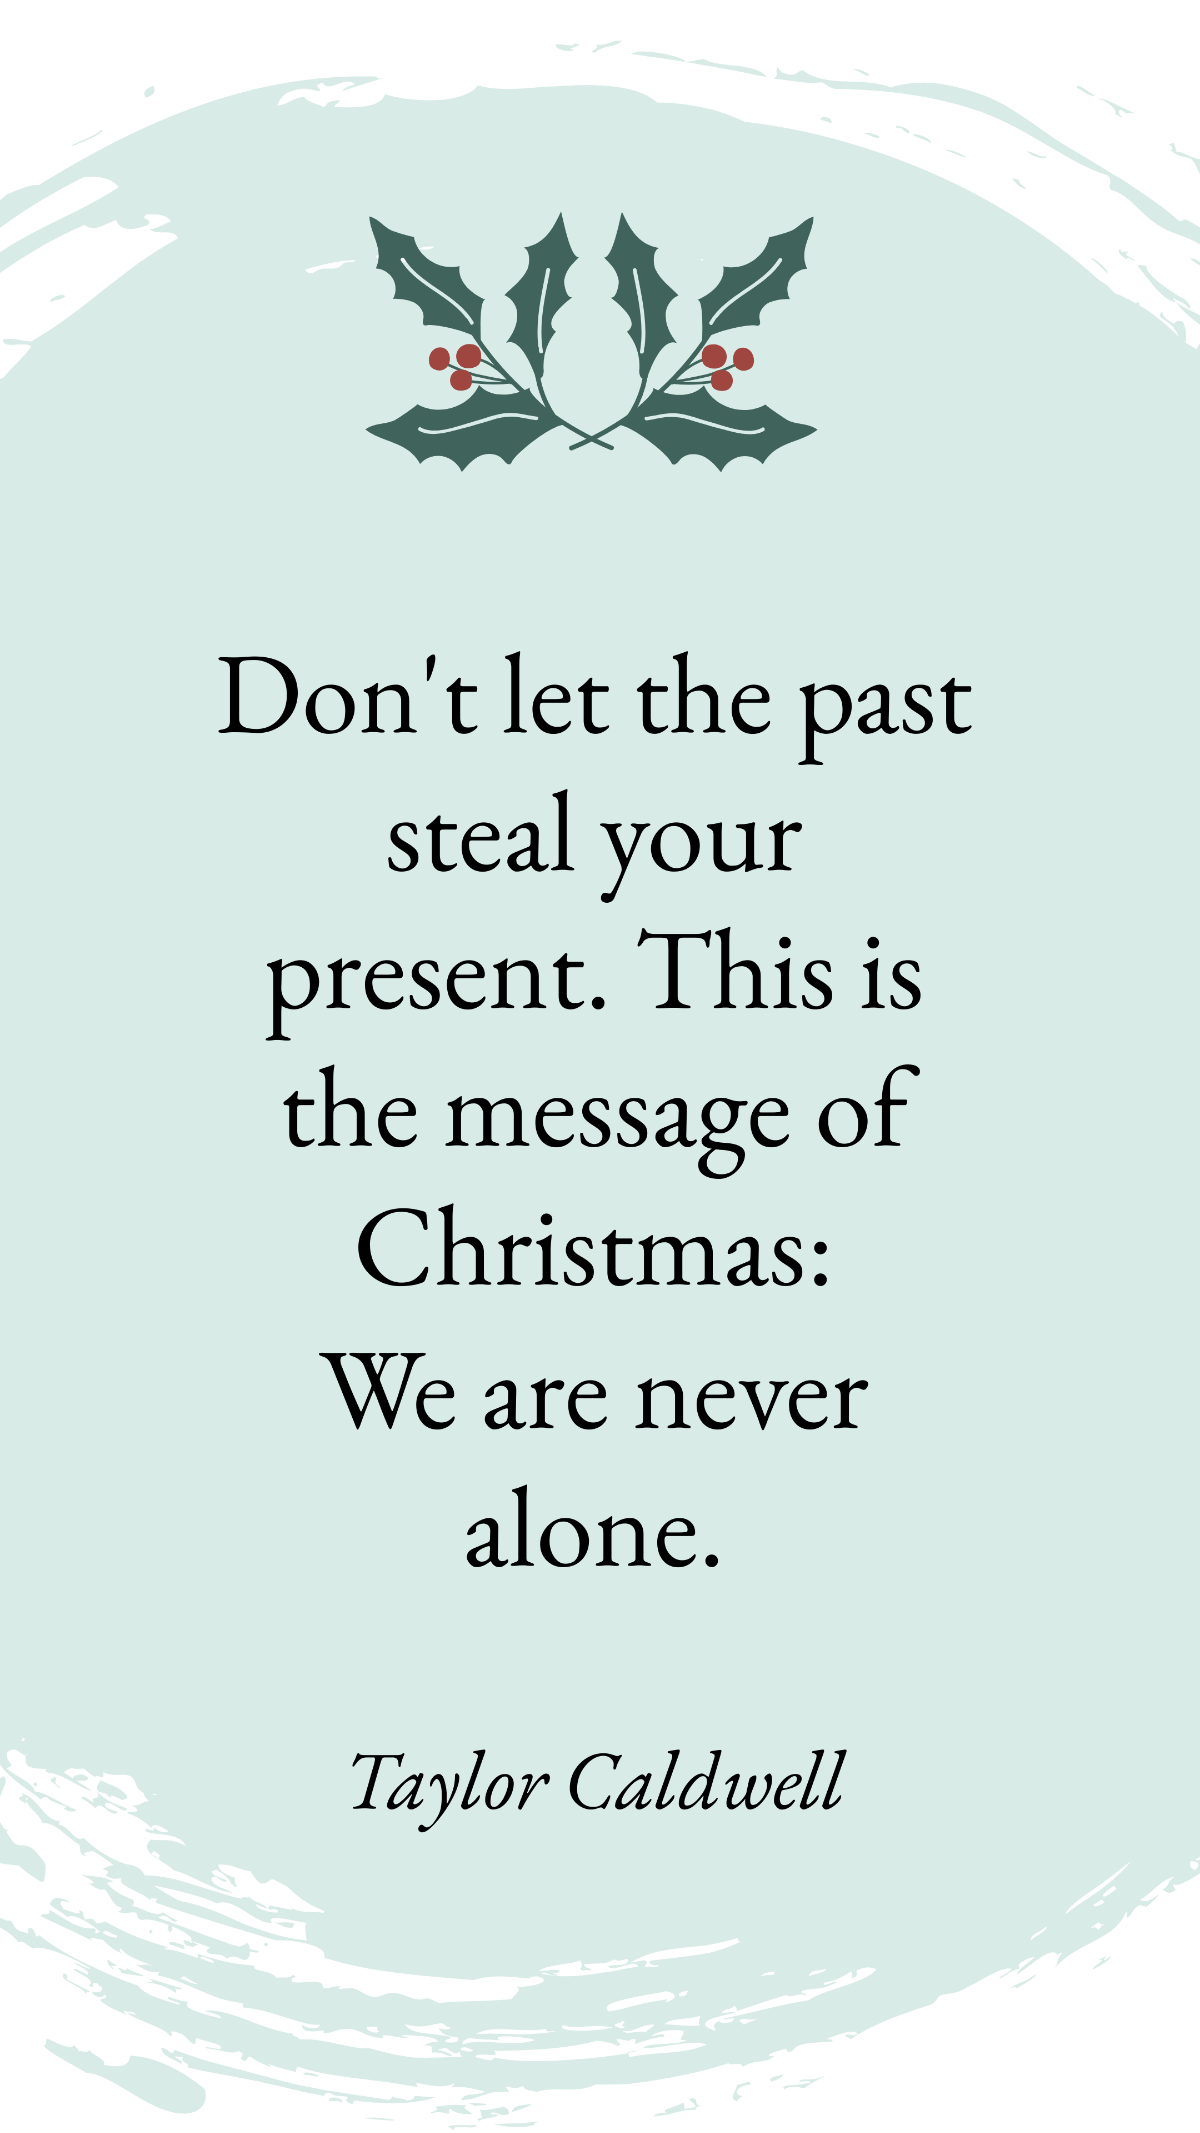 Taylor Caldwell - Don't let the past steal your present. This is the message of Christmas: We are never alone. Template